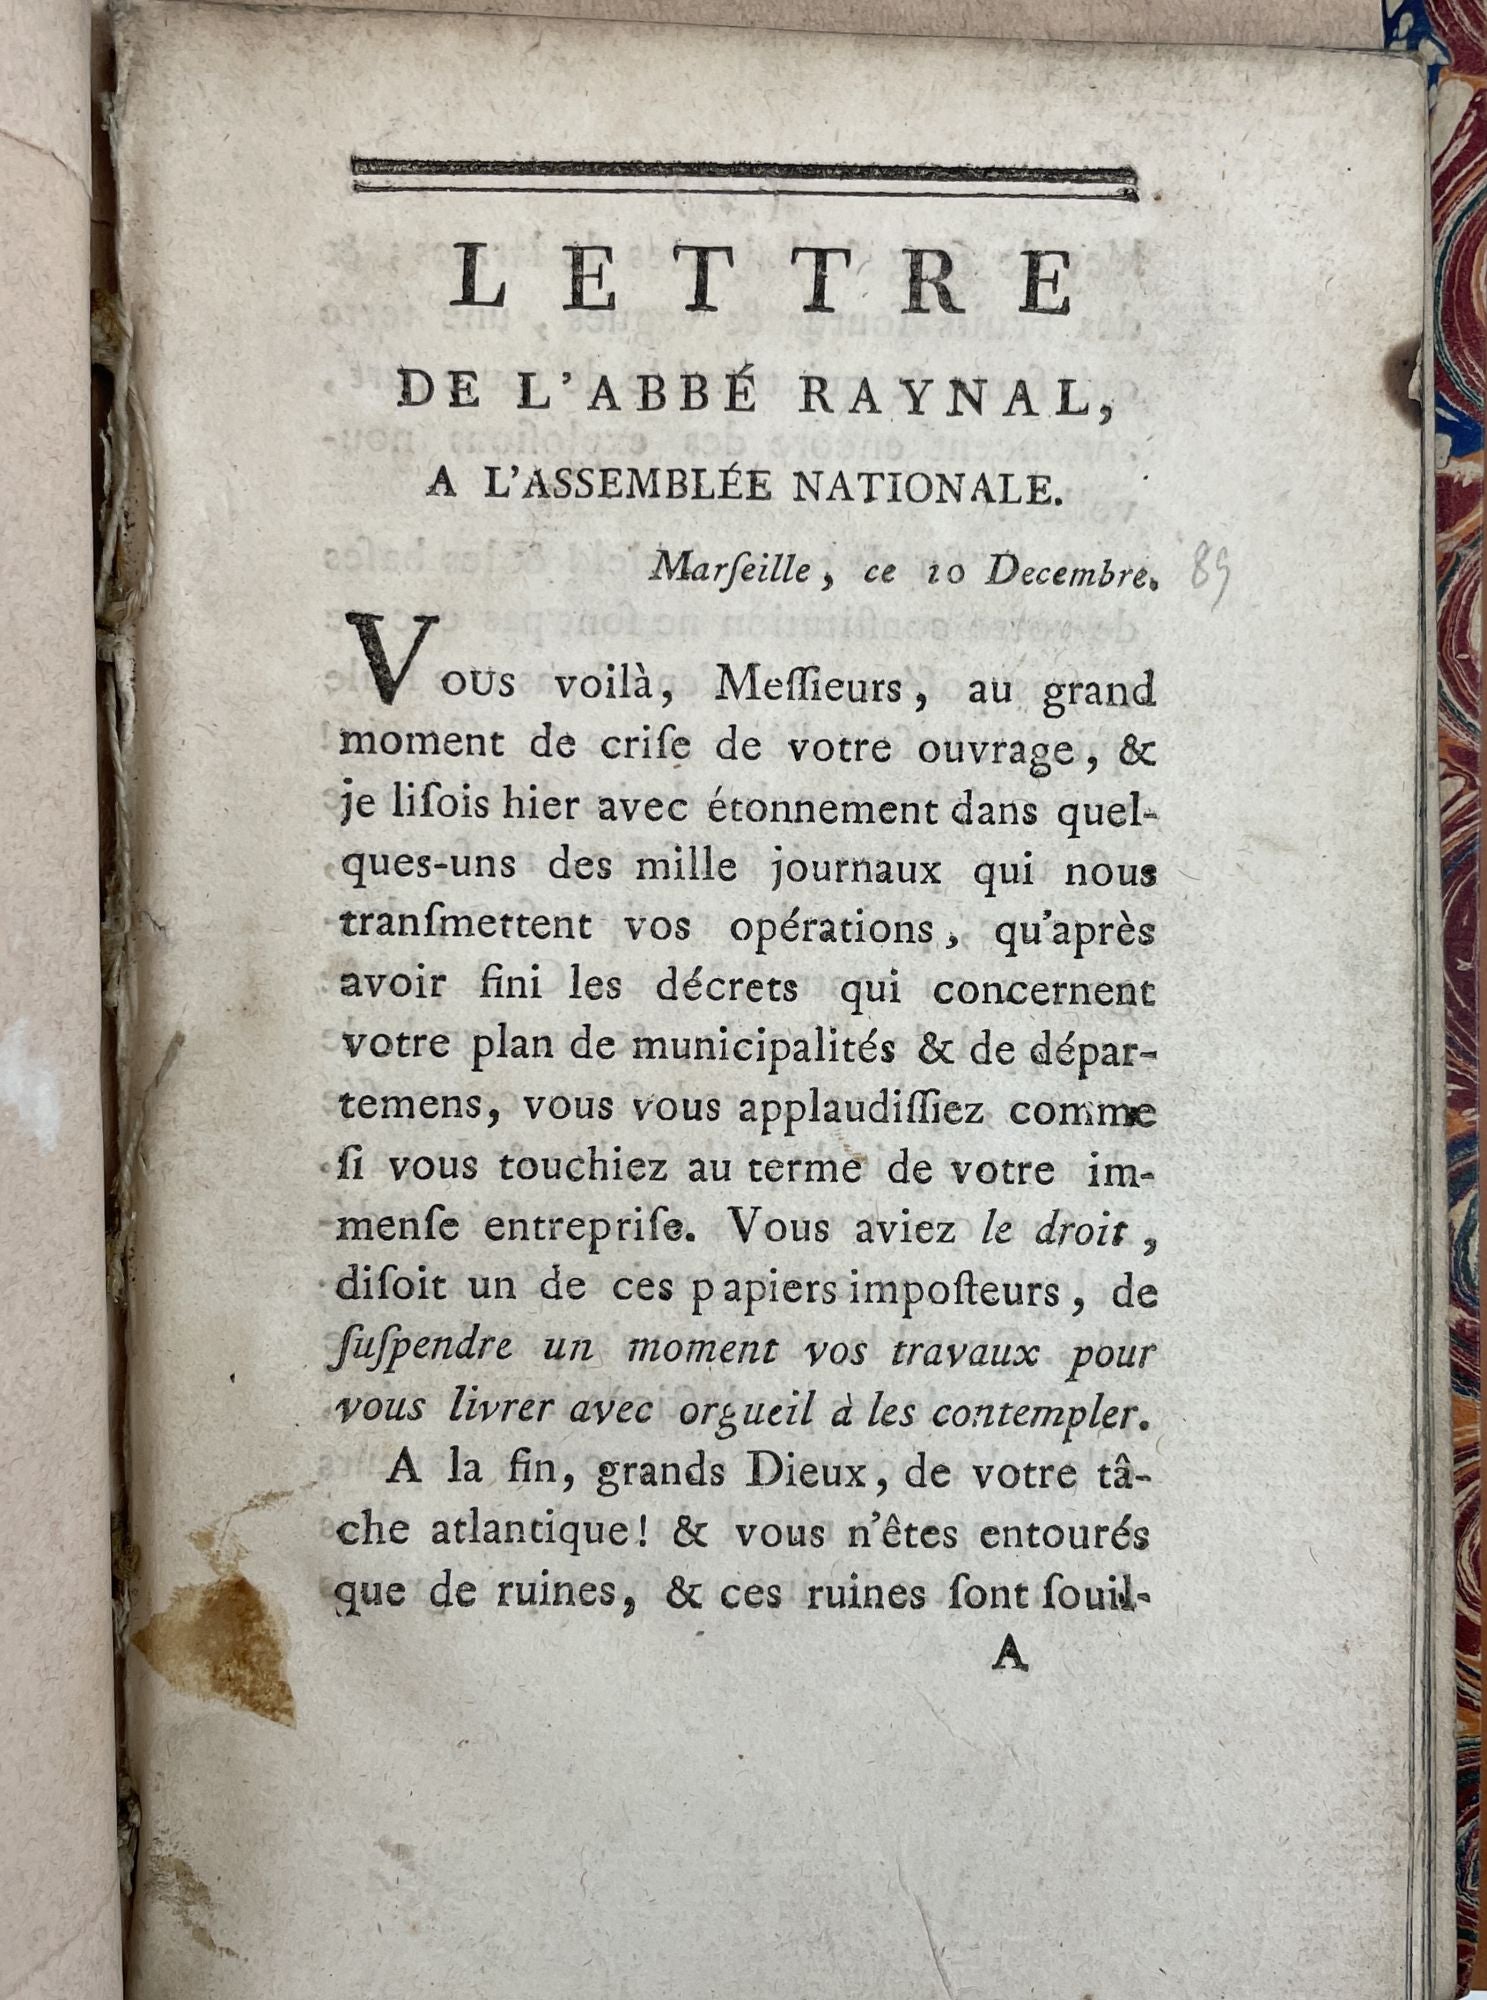 Product Image for THE RUSSELL COLLECTION: BOOKS, BROADSIDES, AND EPHEMERA OF THE FRENCH REVOLUTION